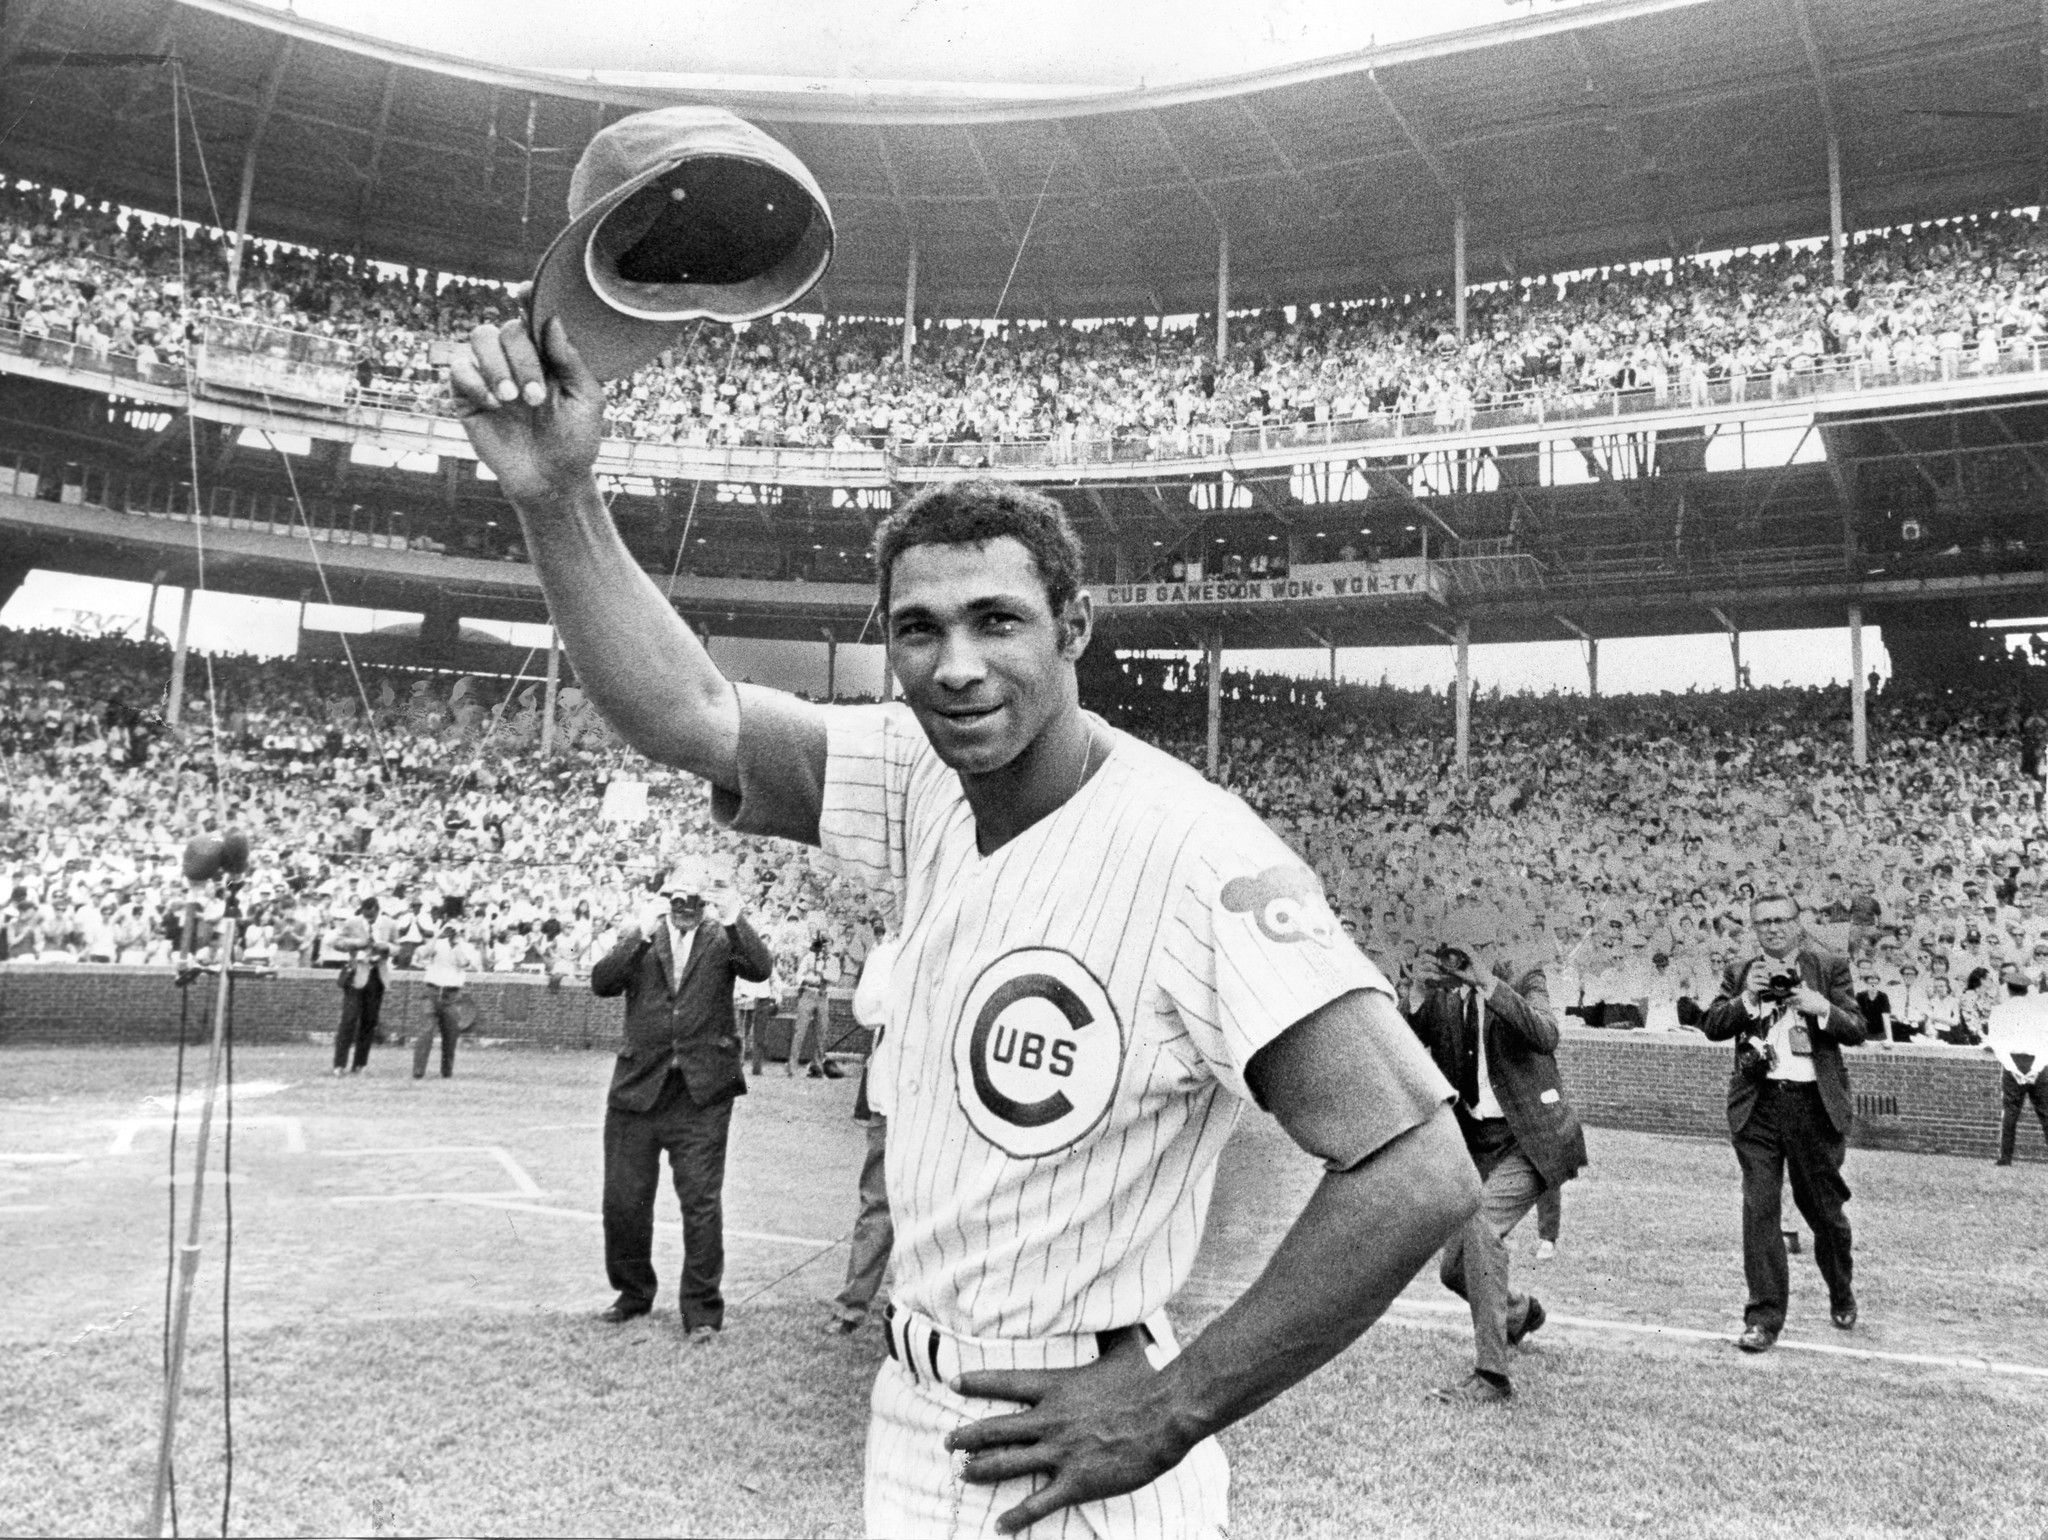 Happy Birthday to HOFer Billy Williams, who turns 79 today! 